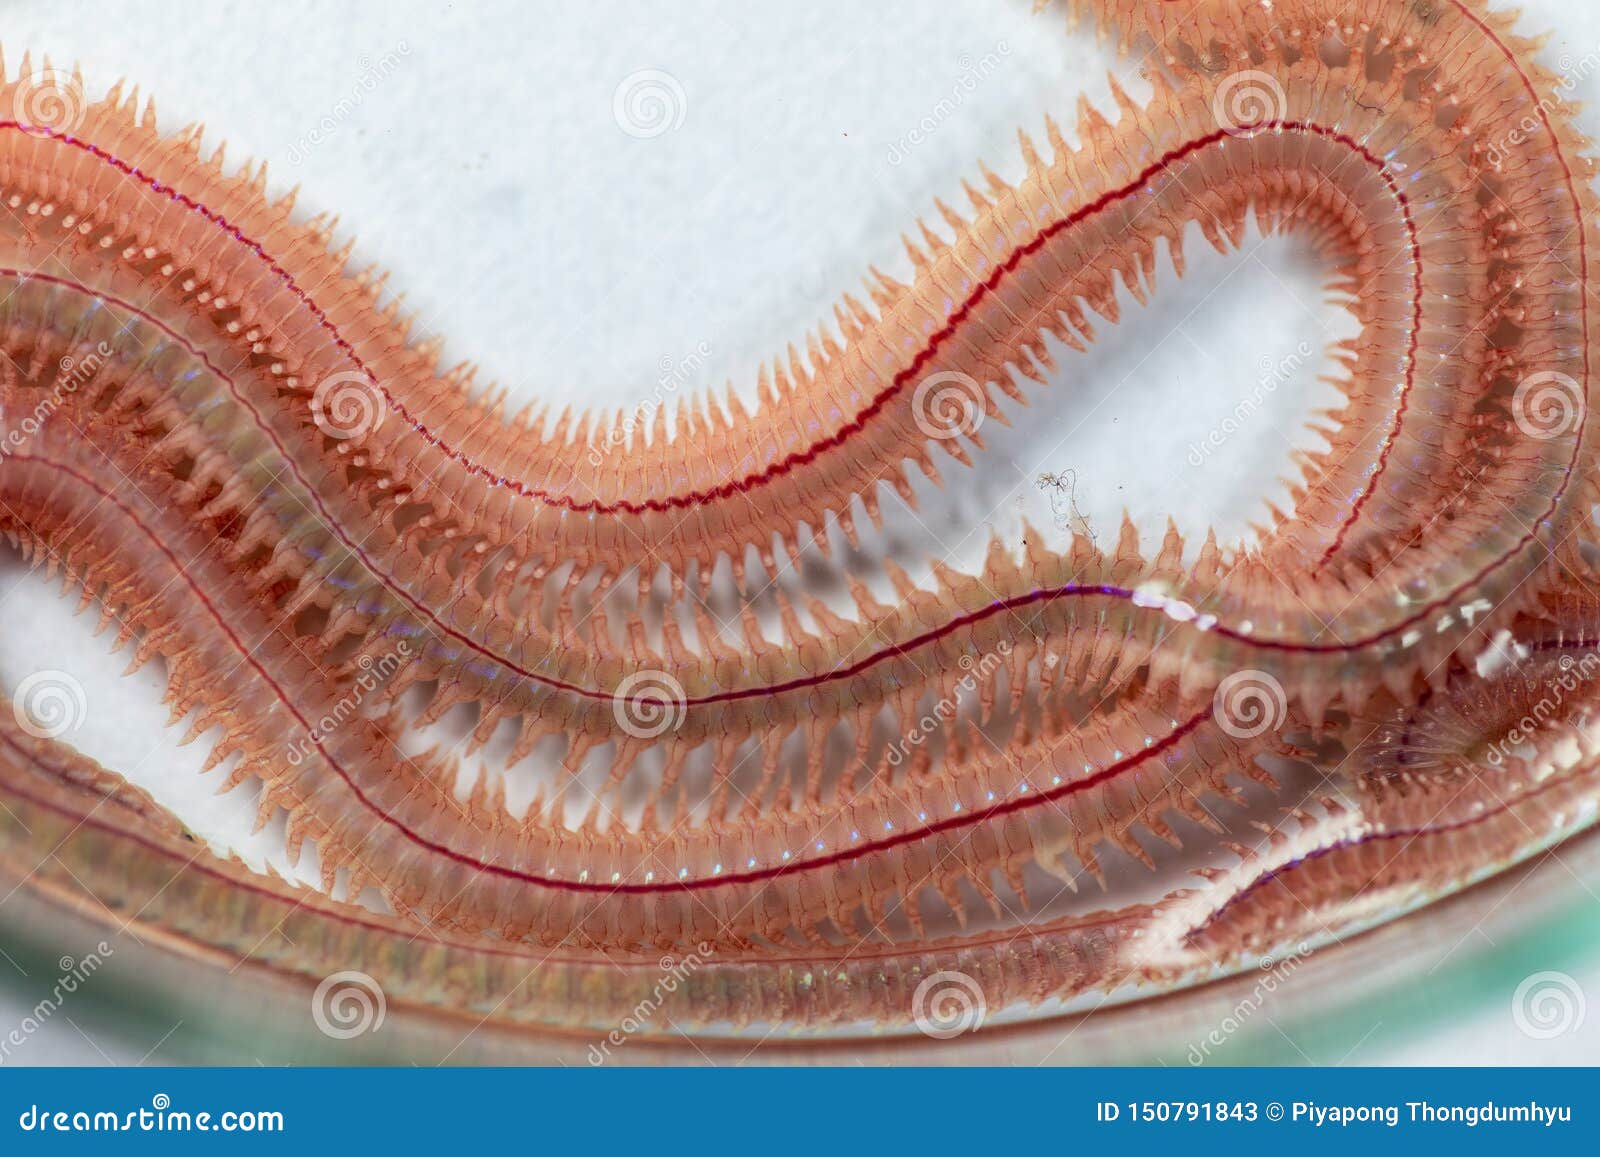 https://thumbs.dreamstime.com/z/sand-worm-perinereis-sp-same-species-as-sea-worms-polychaete-living-beach-area-relatively-shallow-water-levels-150791843.jpg